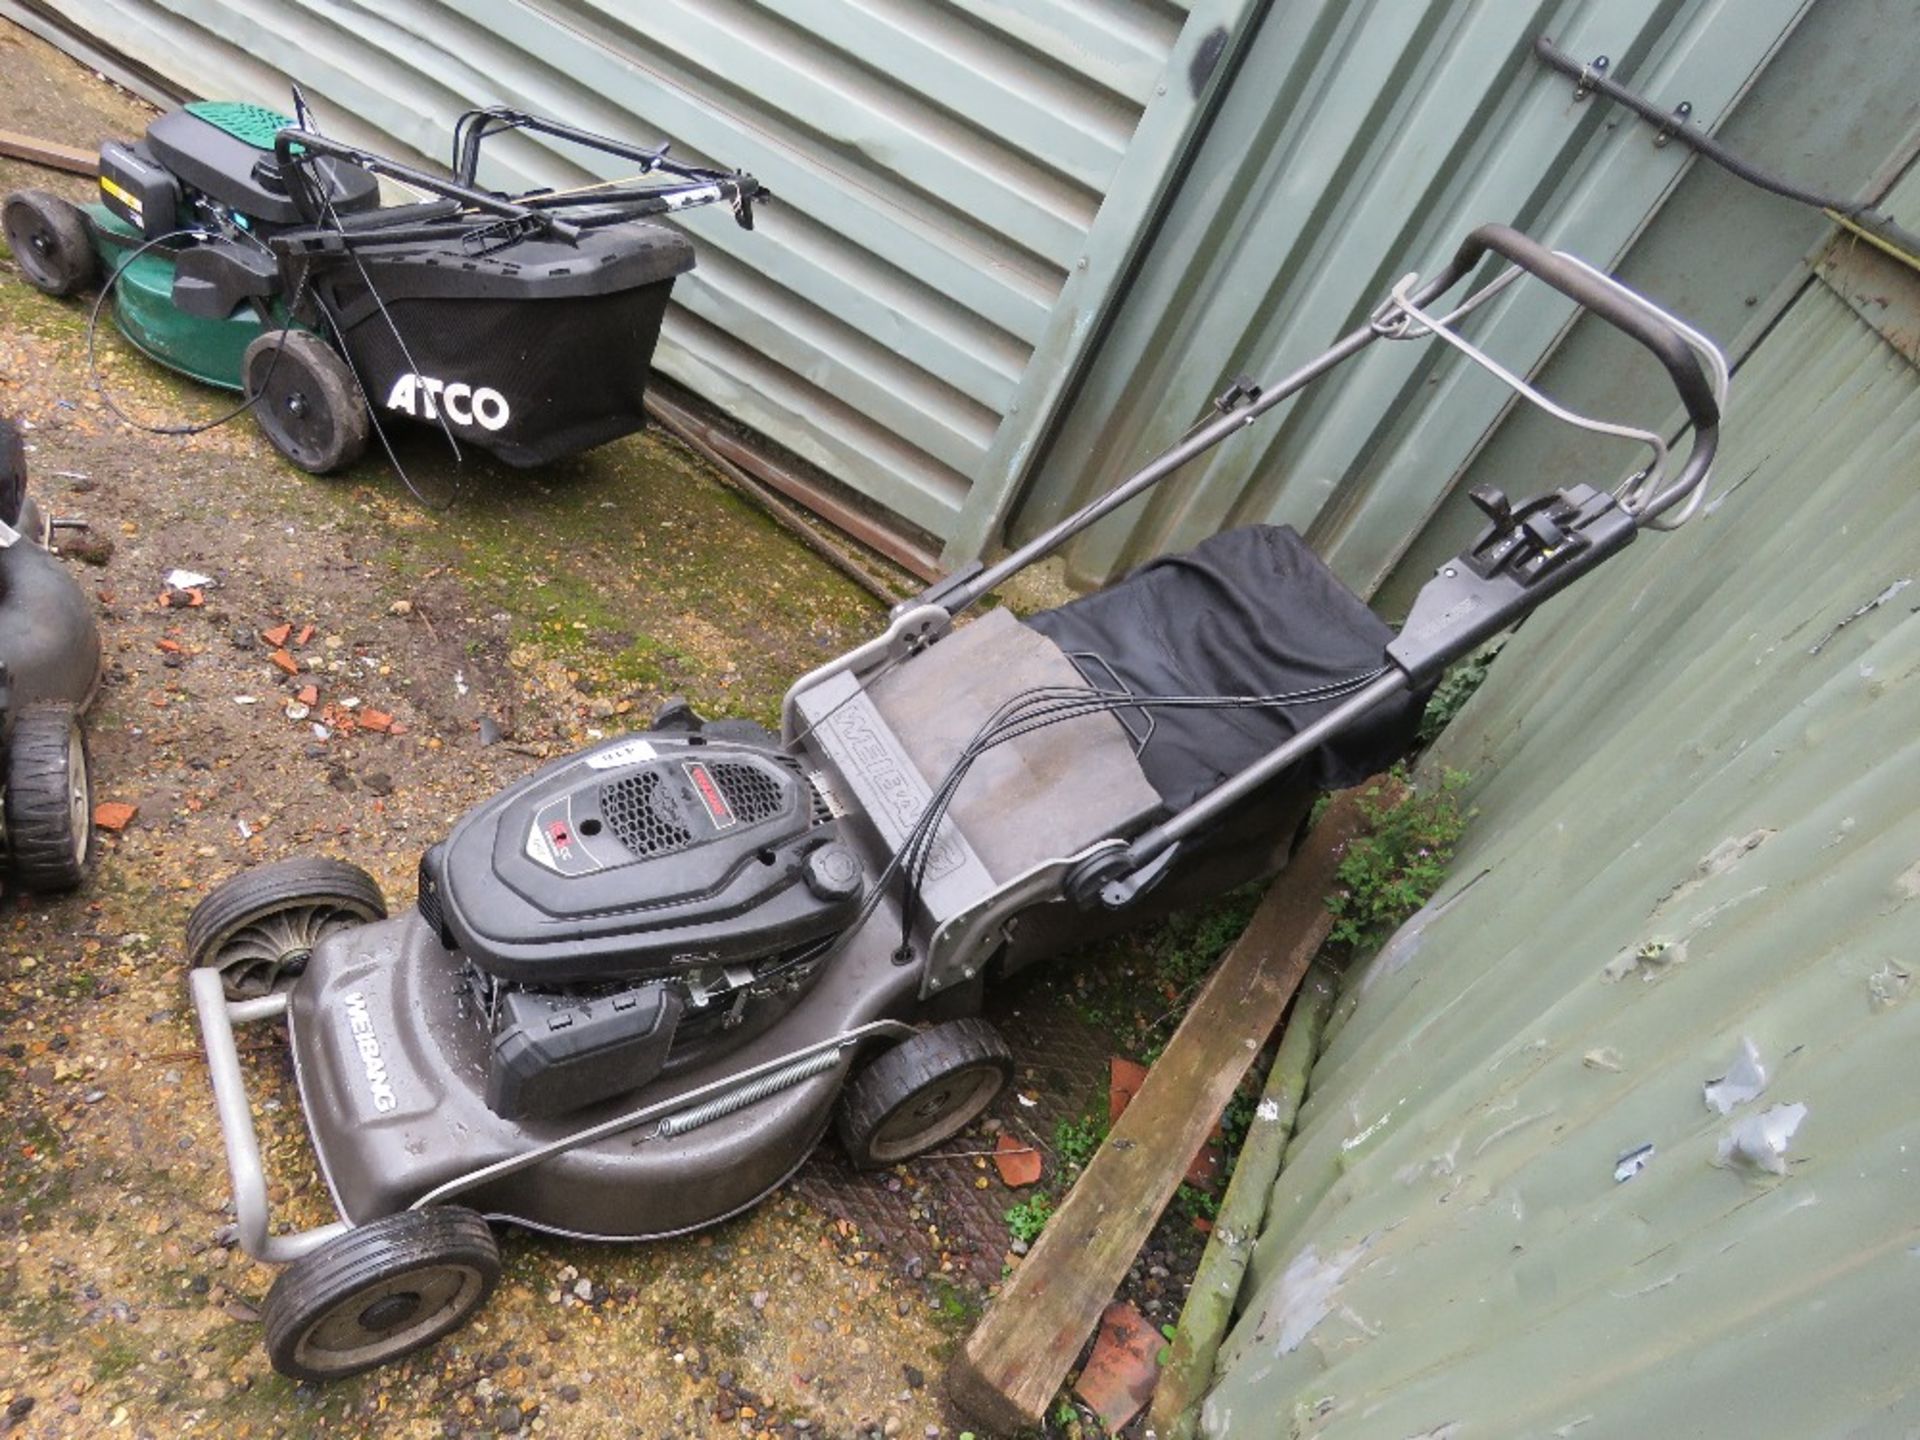 WEIBANG PROFESSIONAL LAWNMOWER WITH COLLECTOR. DIRECT FROM LOCAL LANDSCAPE COMPANY WHO ARE CLOSING A - Image 2 of 3